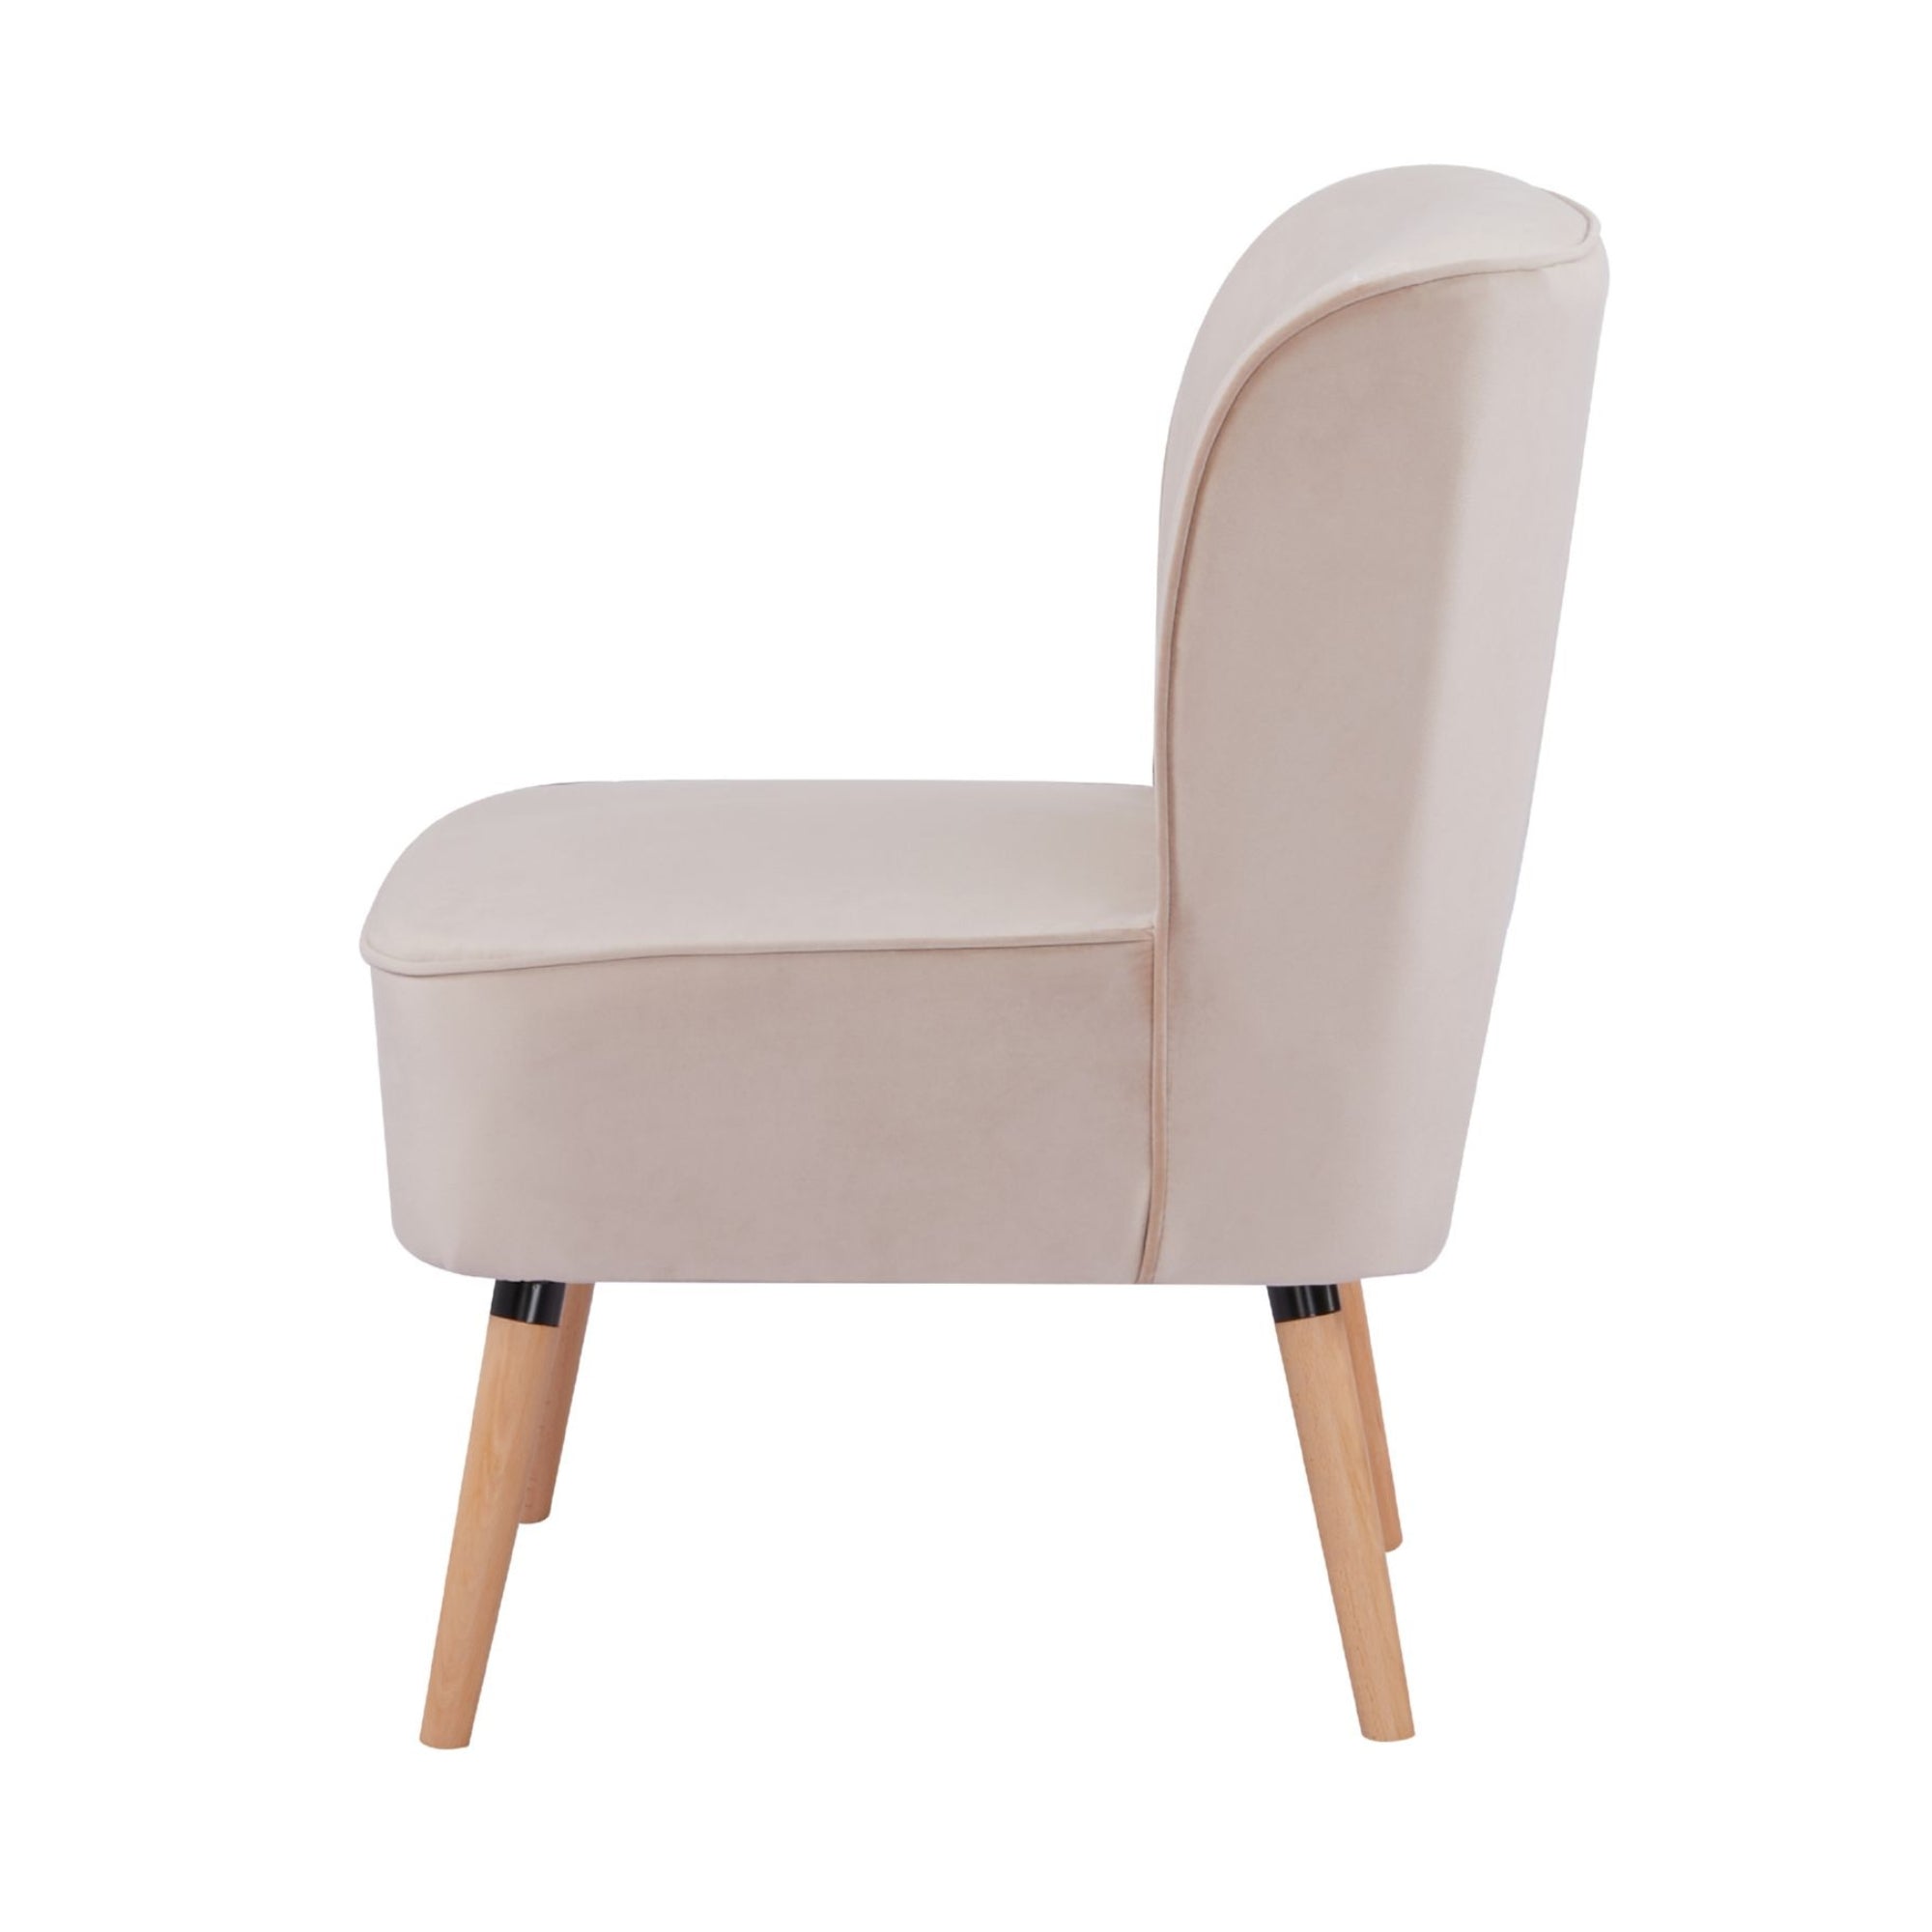 Pink Fabric Upholstered Accent Chair, Foam Support, Wooden Legs